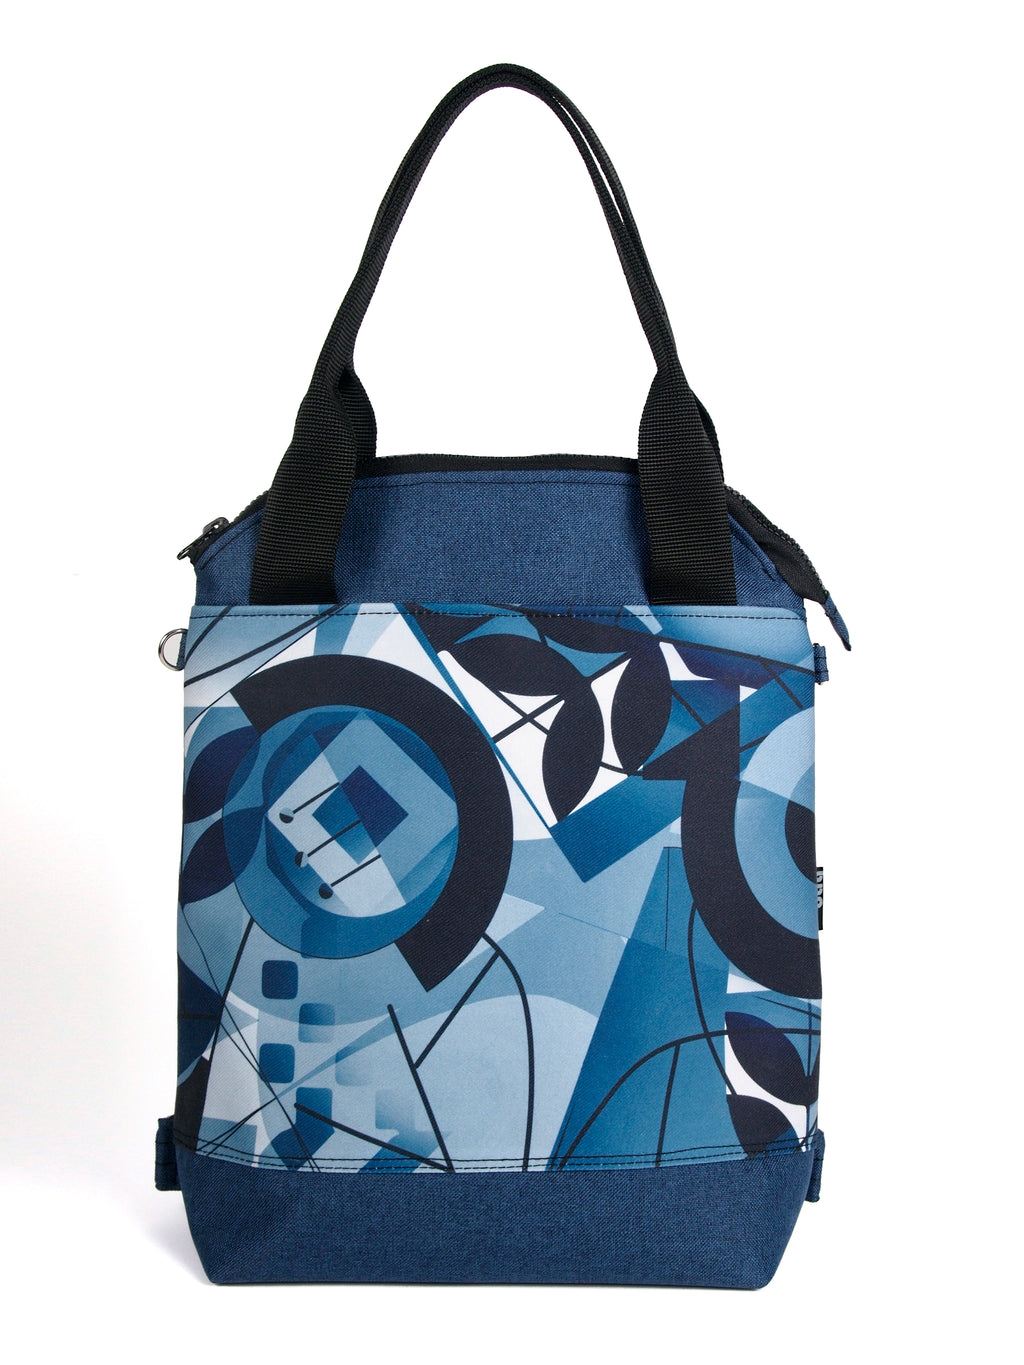 Bardo classic backpack textiles - Geometric flowers variation - Premium Textiles from BARDO ART WORKS - Just lvabstract, black, floral, handemade, leaves, tablet, urban style, woman, work bag89.00! Shop now at BARDO ART WORKS